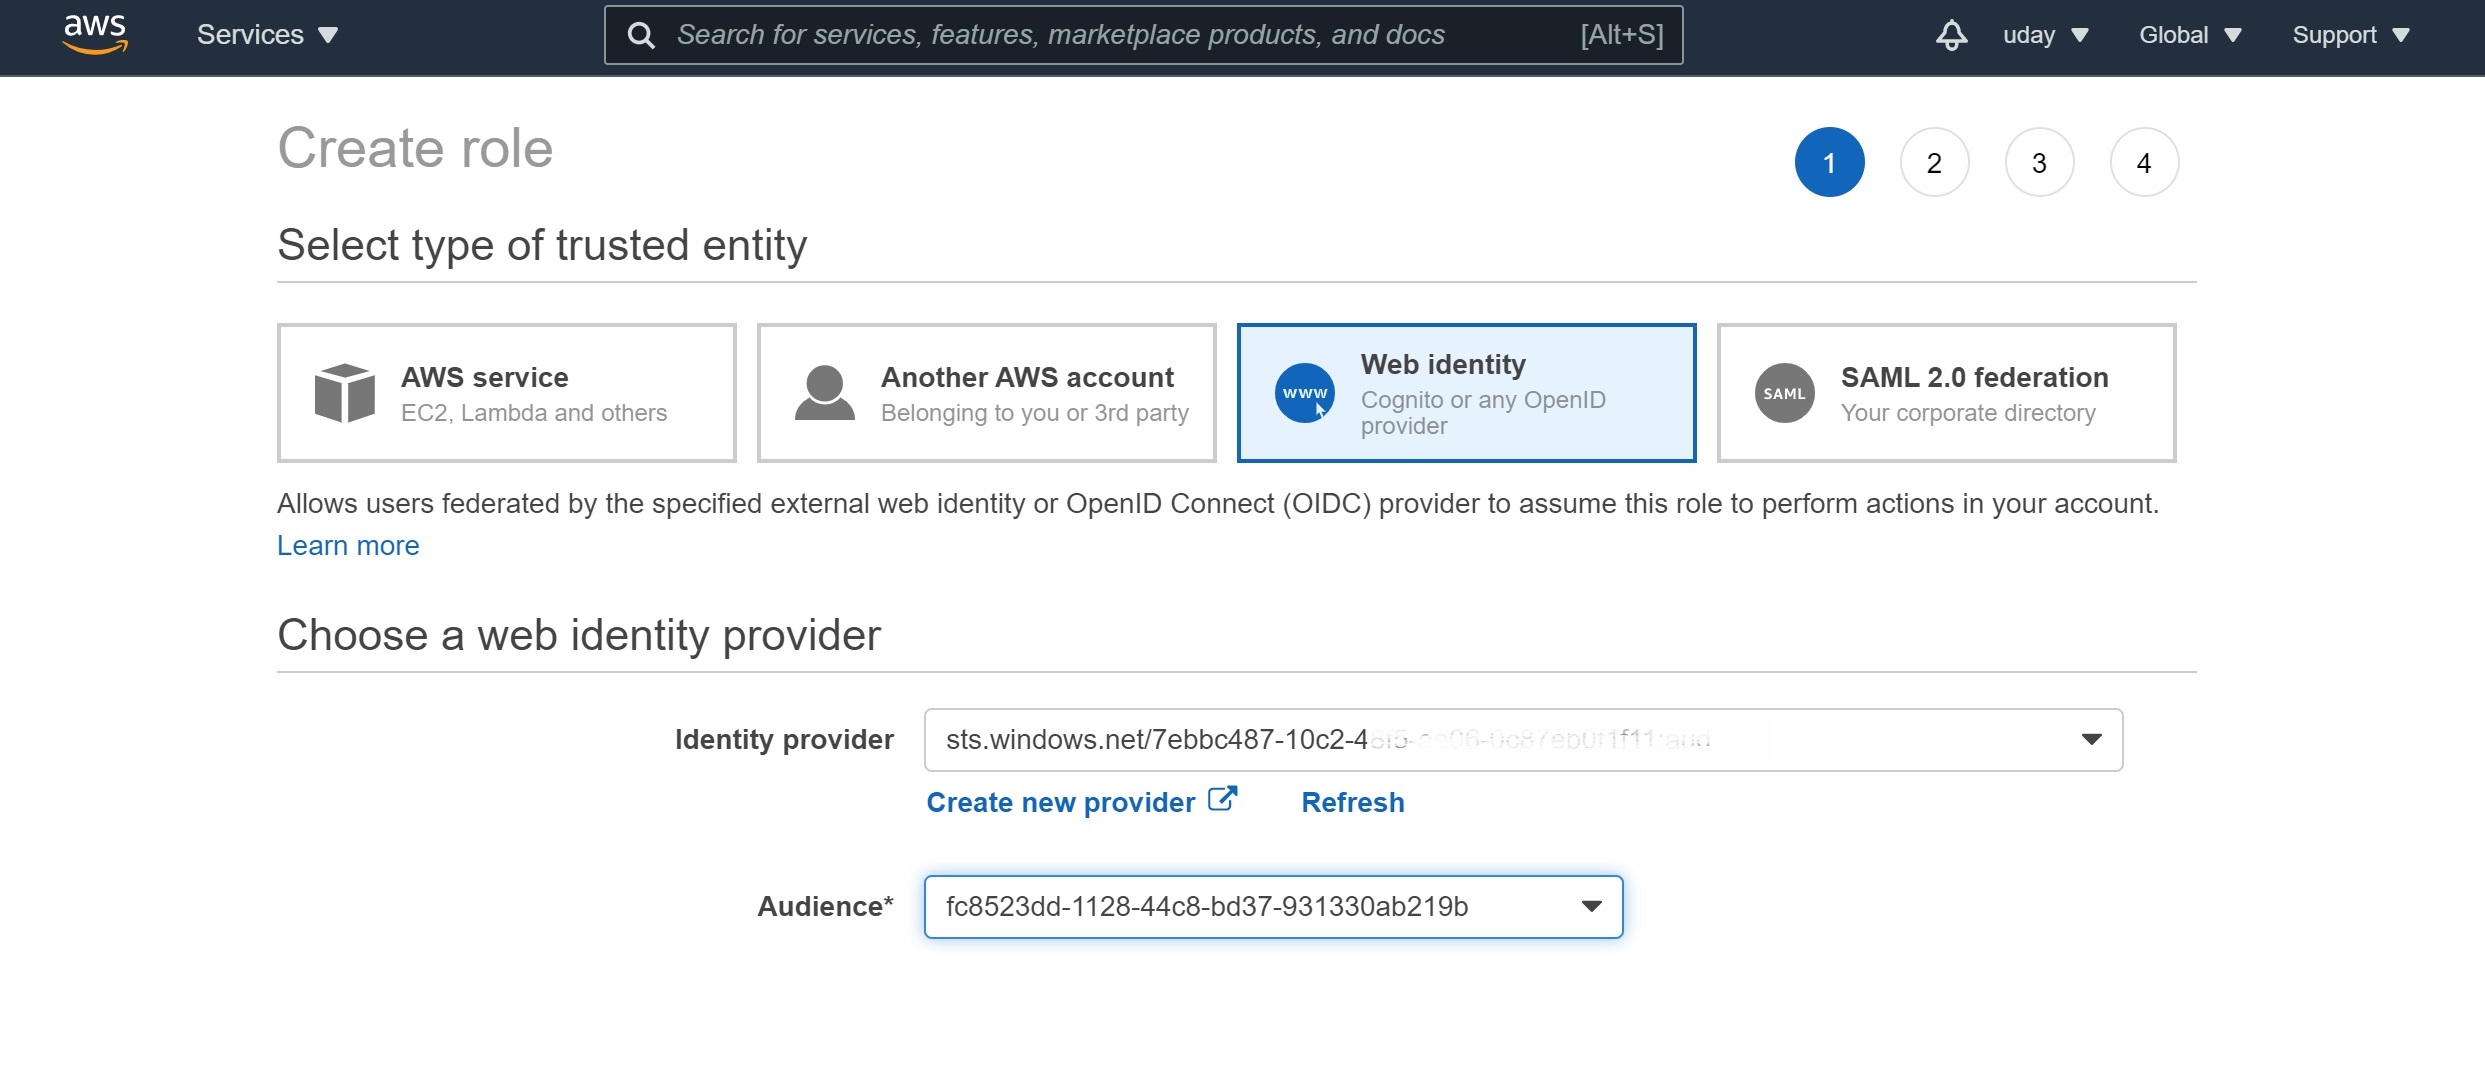 Assign role to identity provider